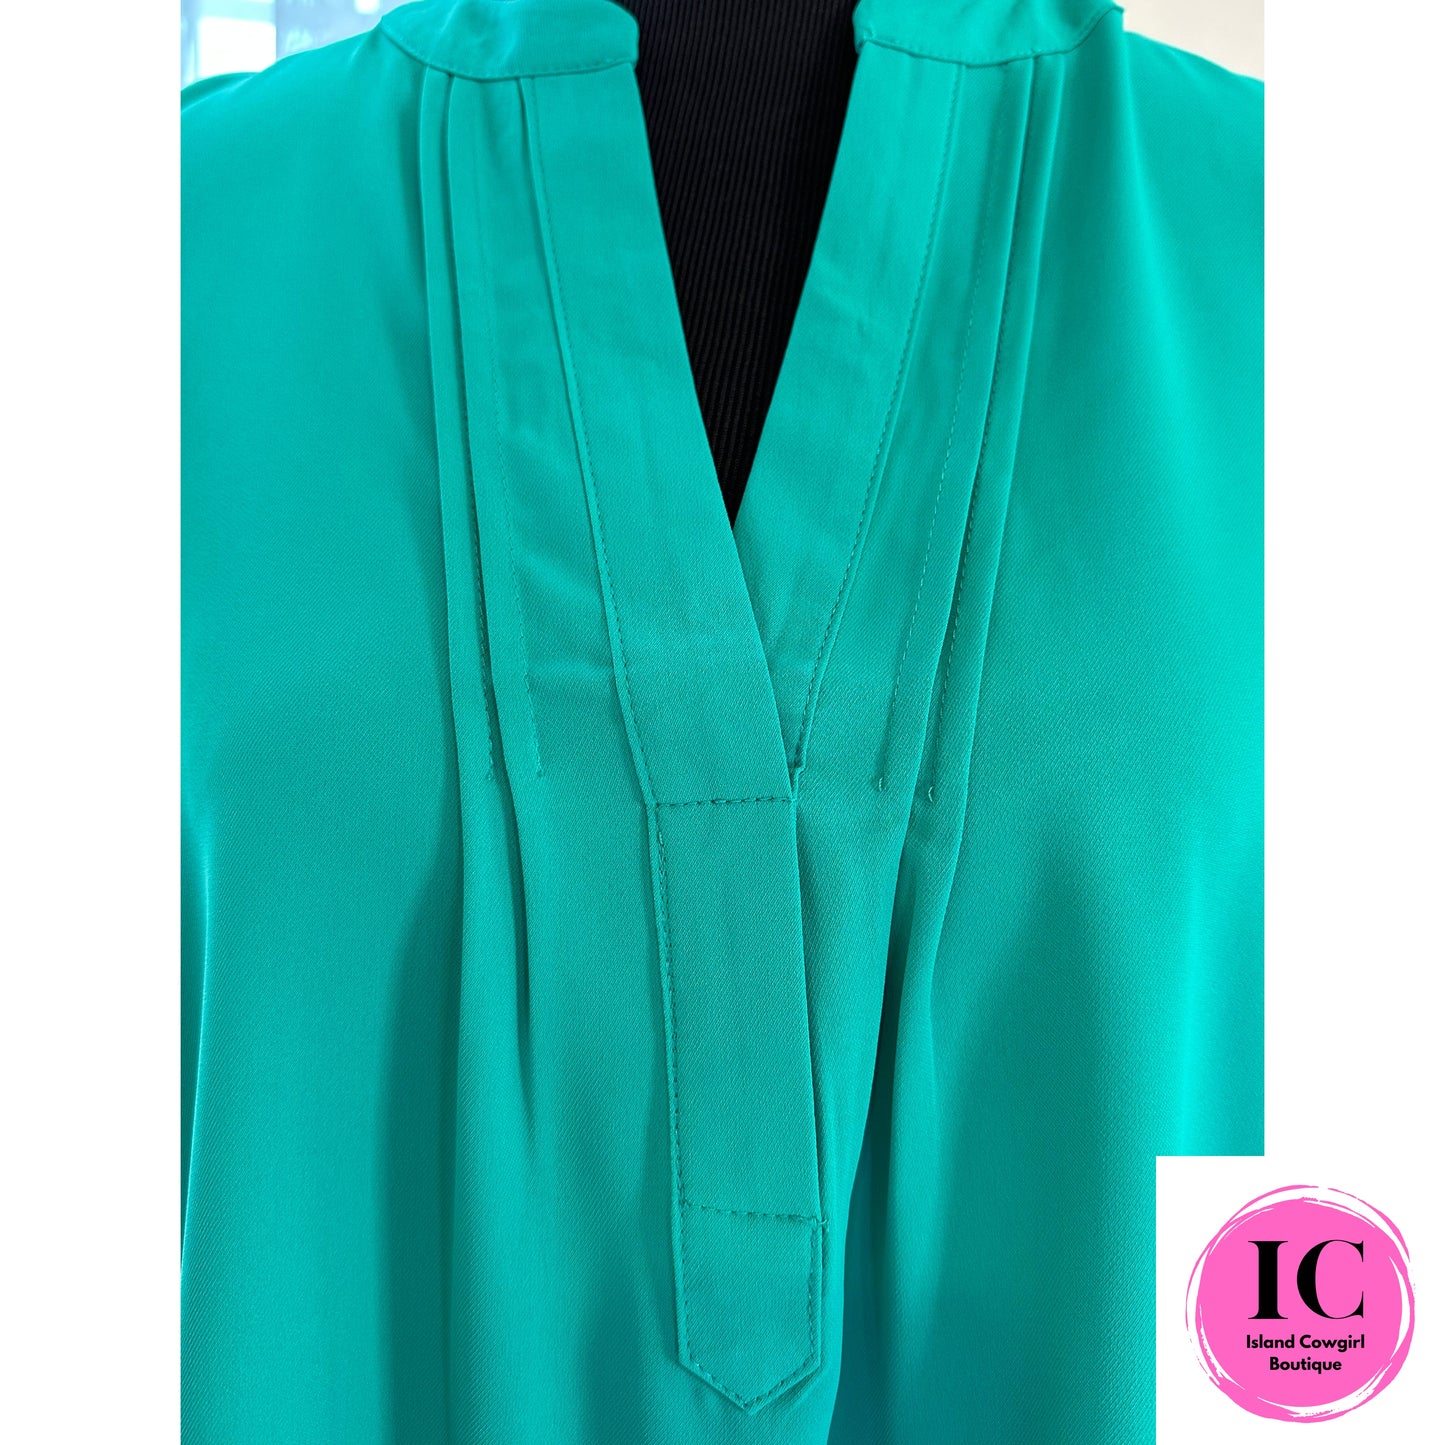 Find Your Way Emerald Green  Blouses